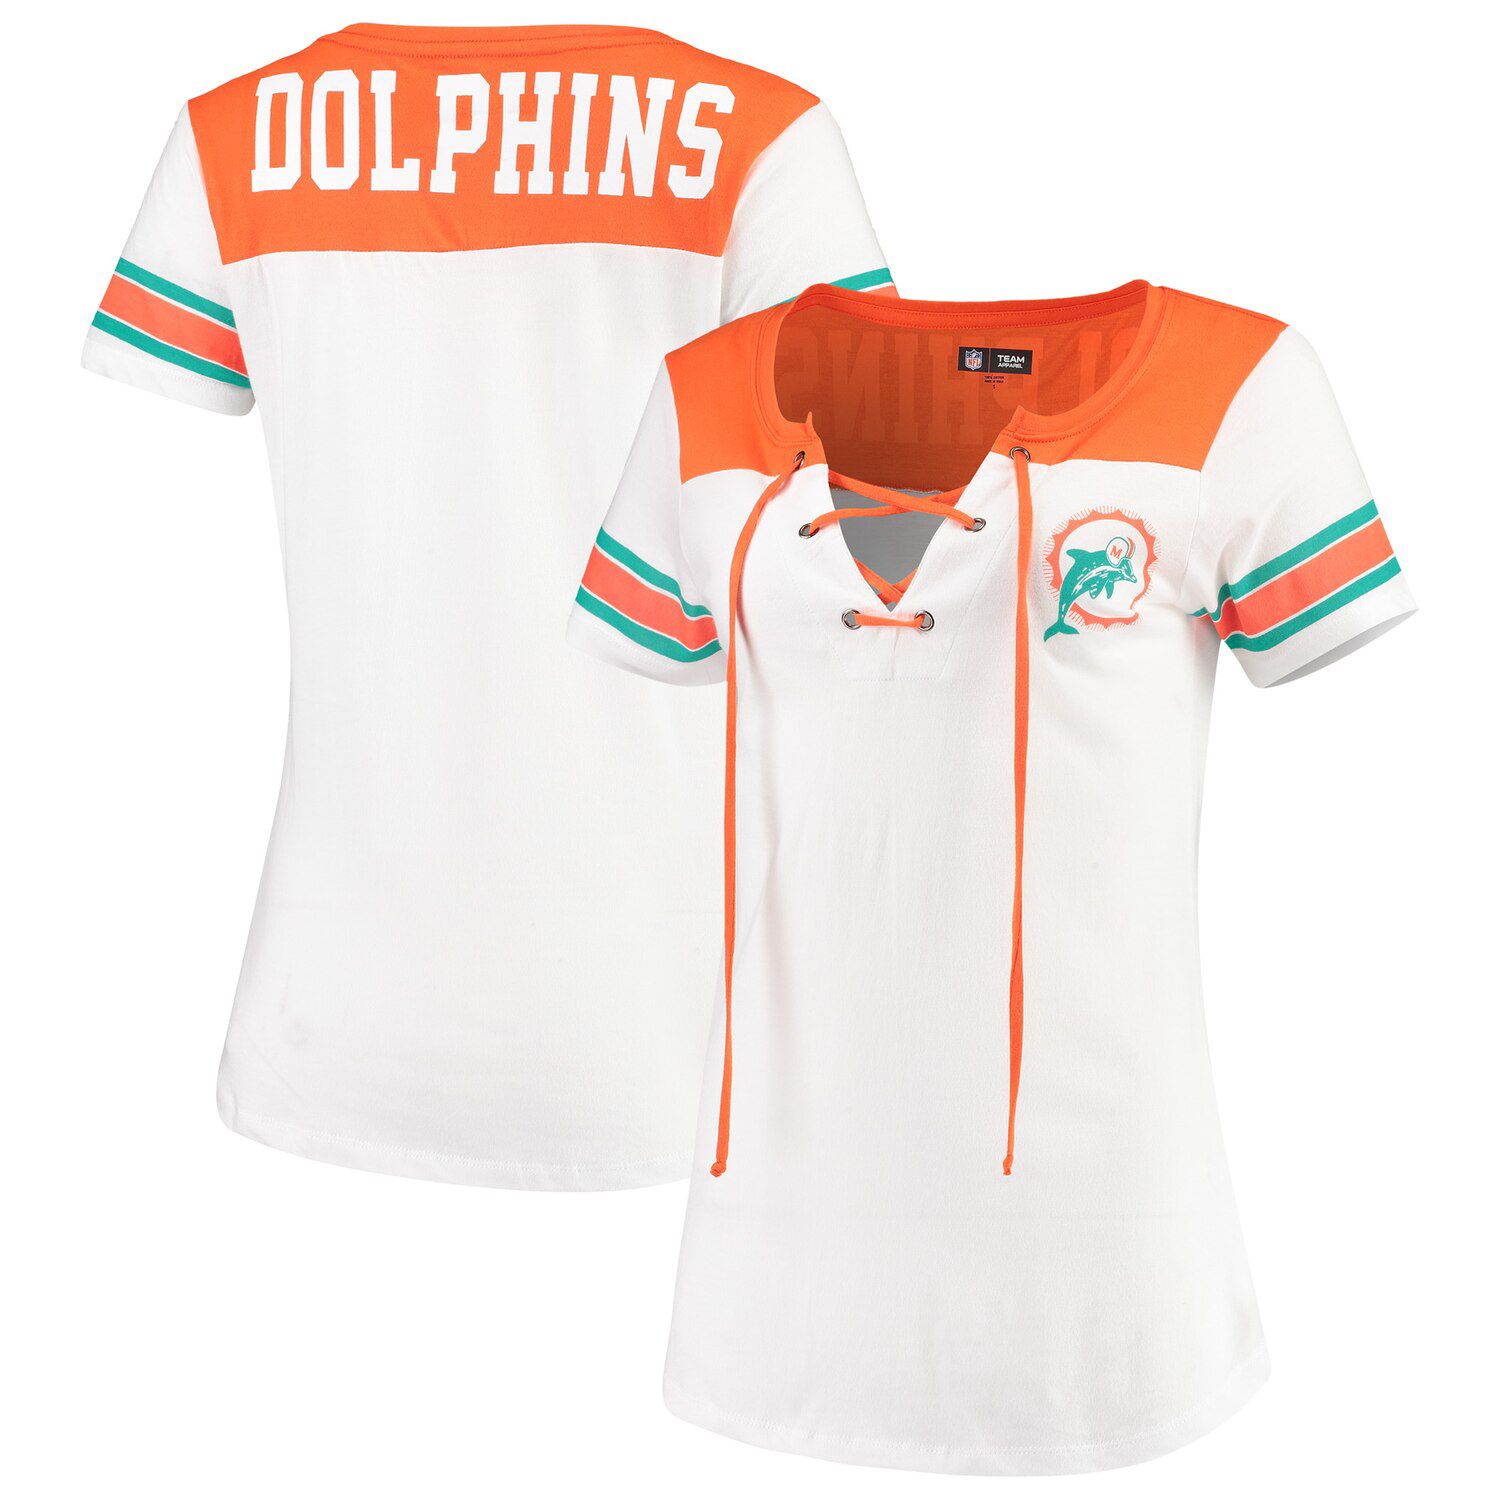 miami dolphins female jersey